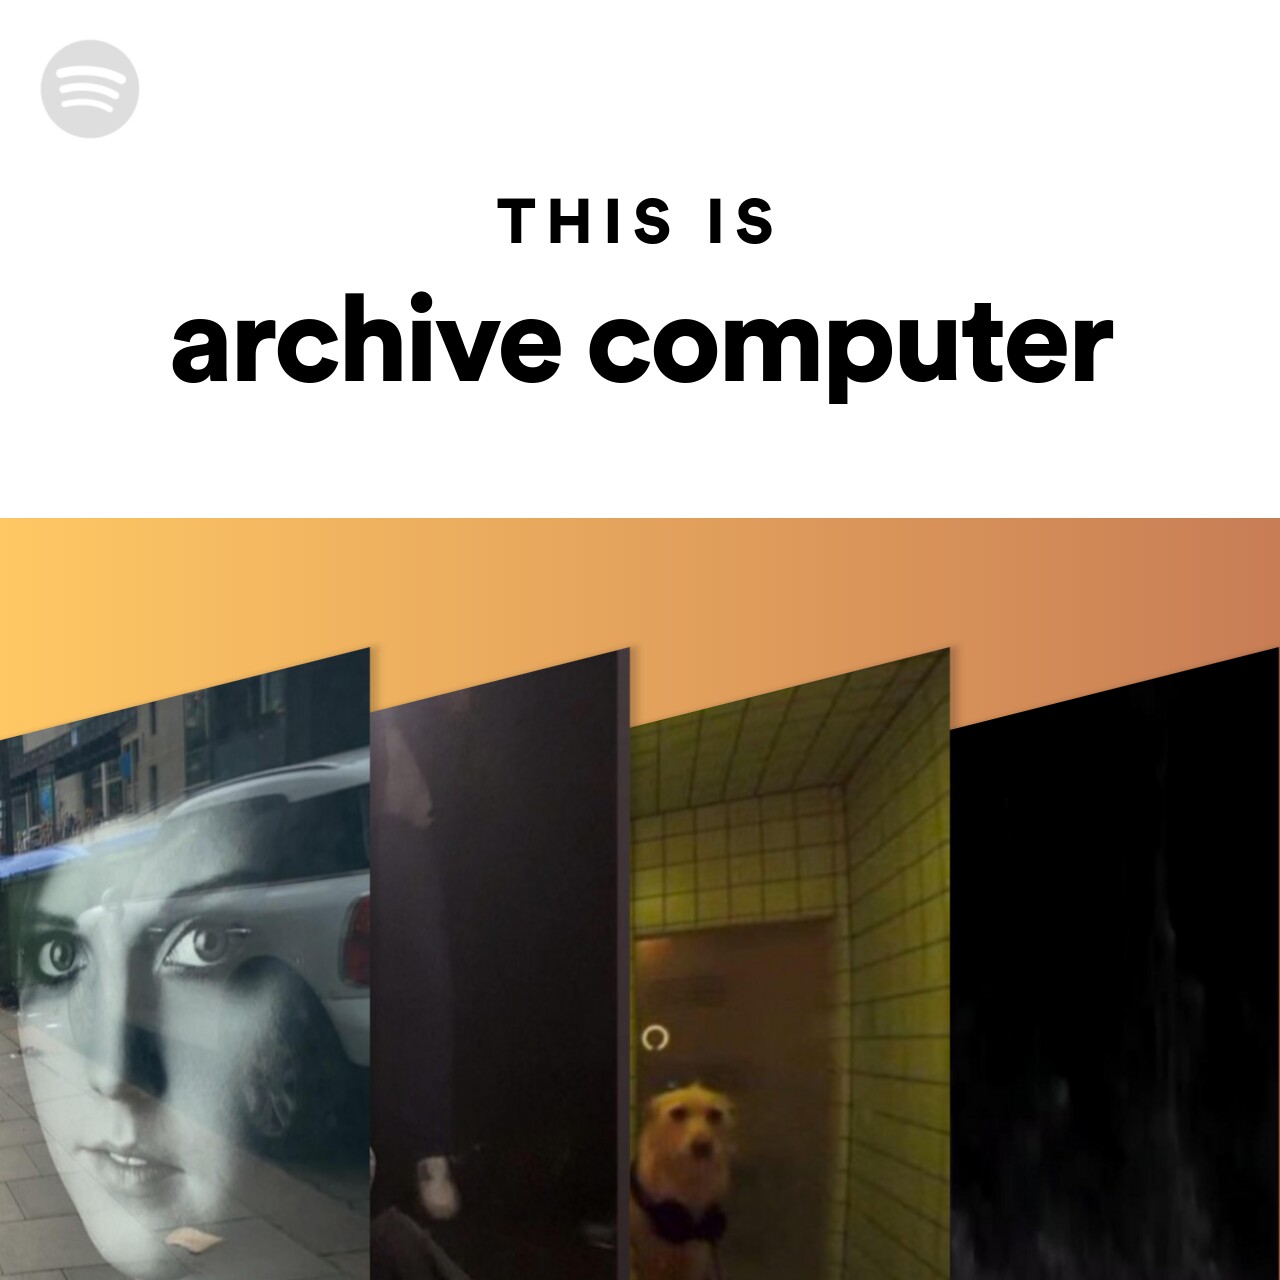 This Is archive computer